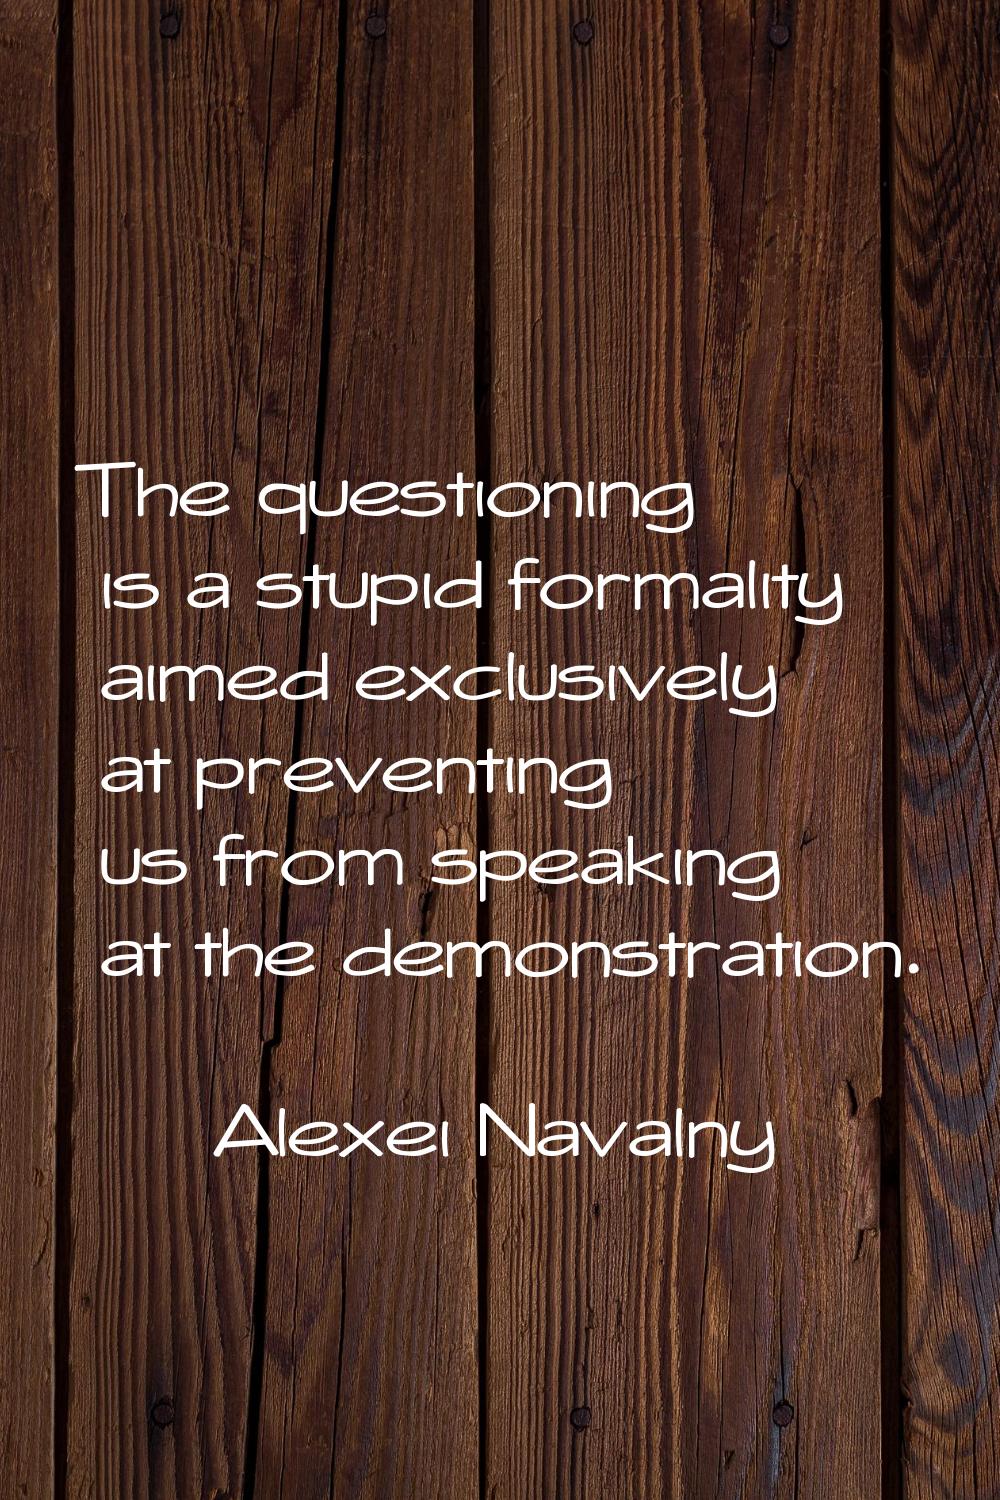 The questioning is a stupid formality aimed exclusively at preventing us from speaking at the demon